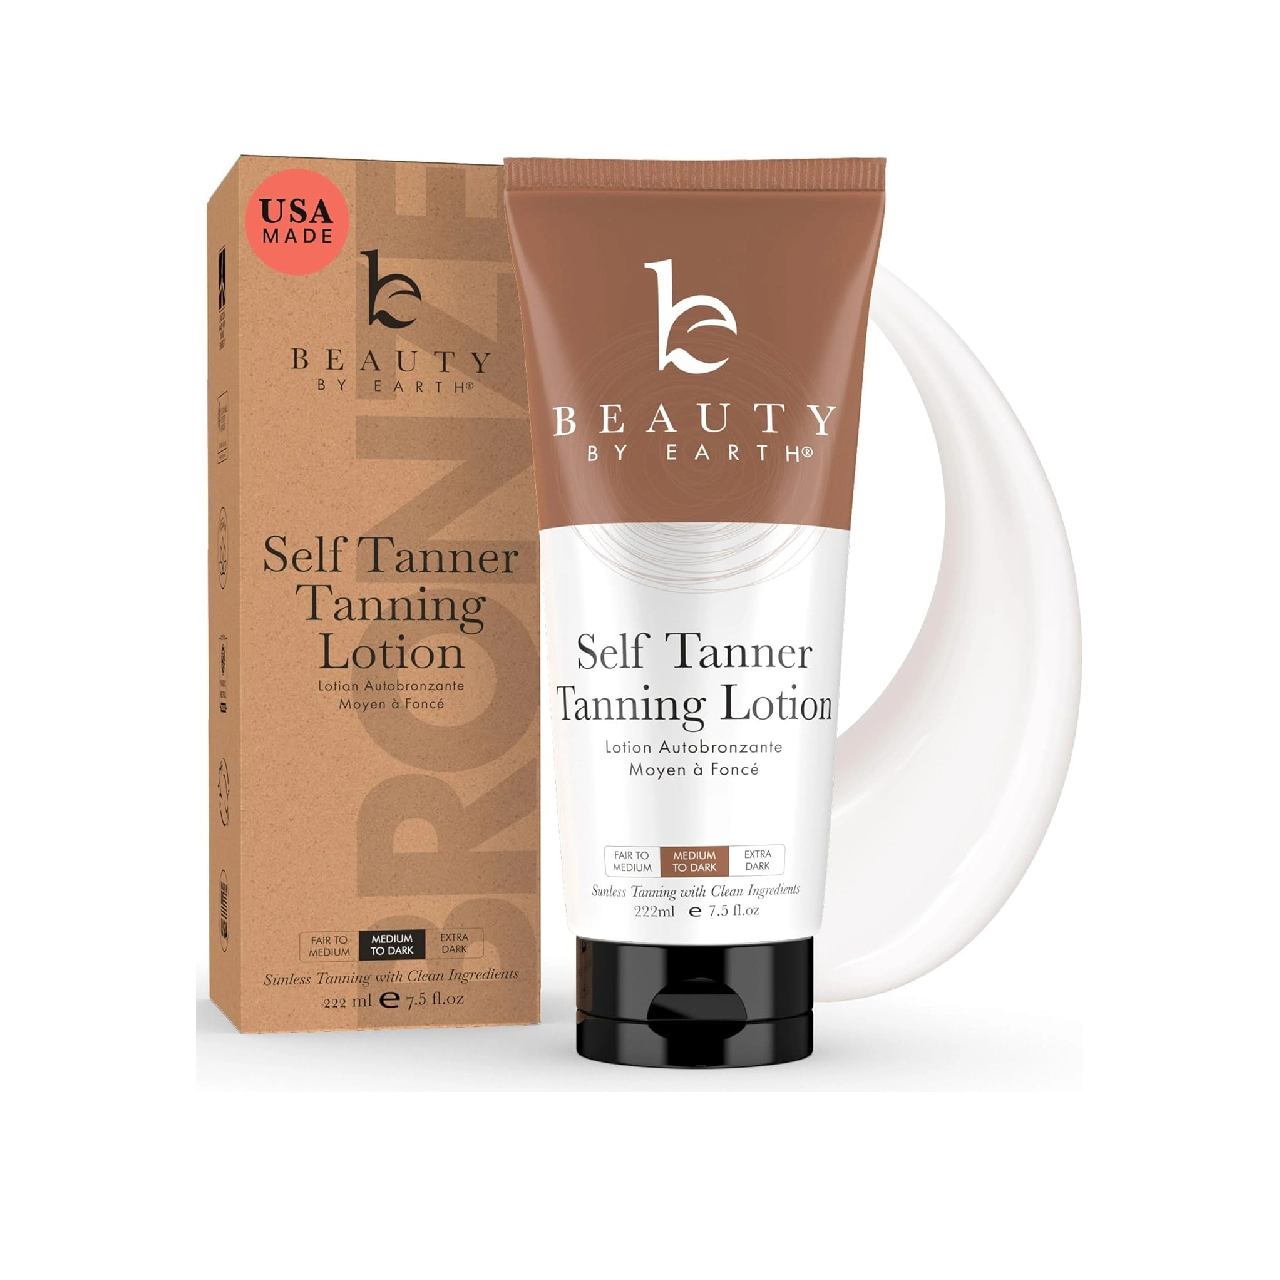 Bottle of Beauty by Earth Self Tanner on a white background